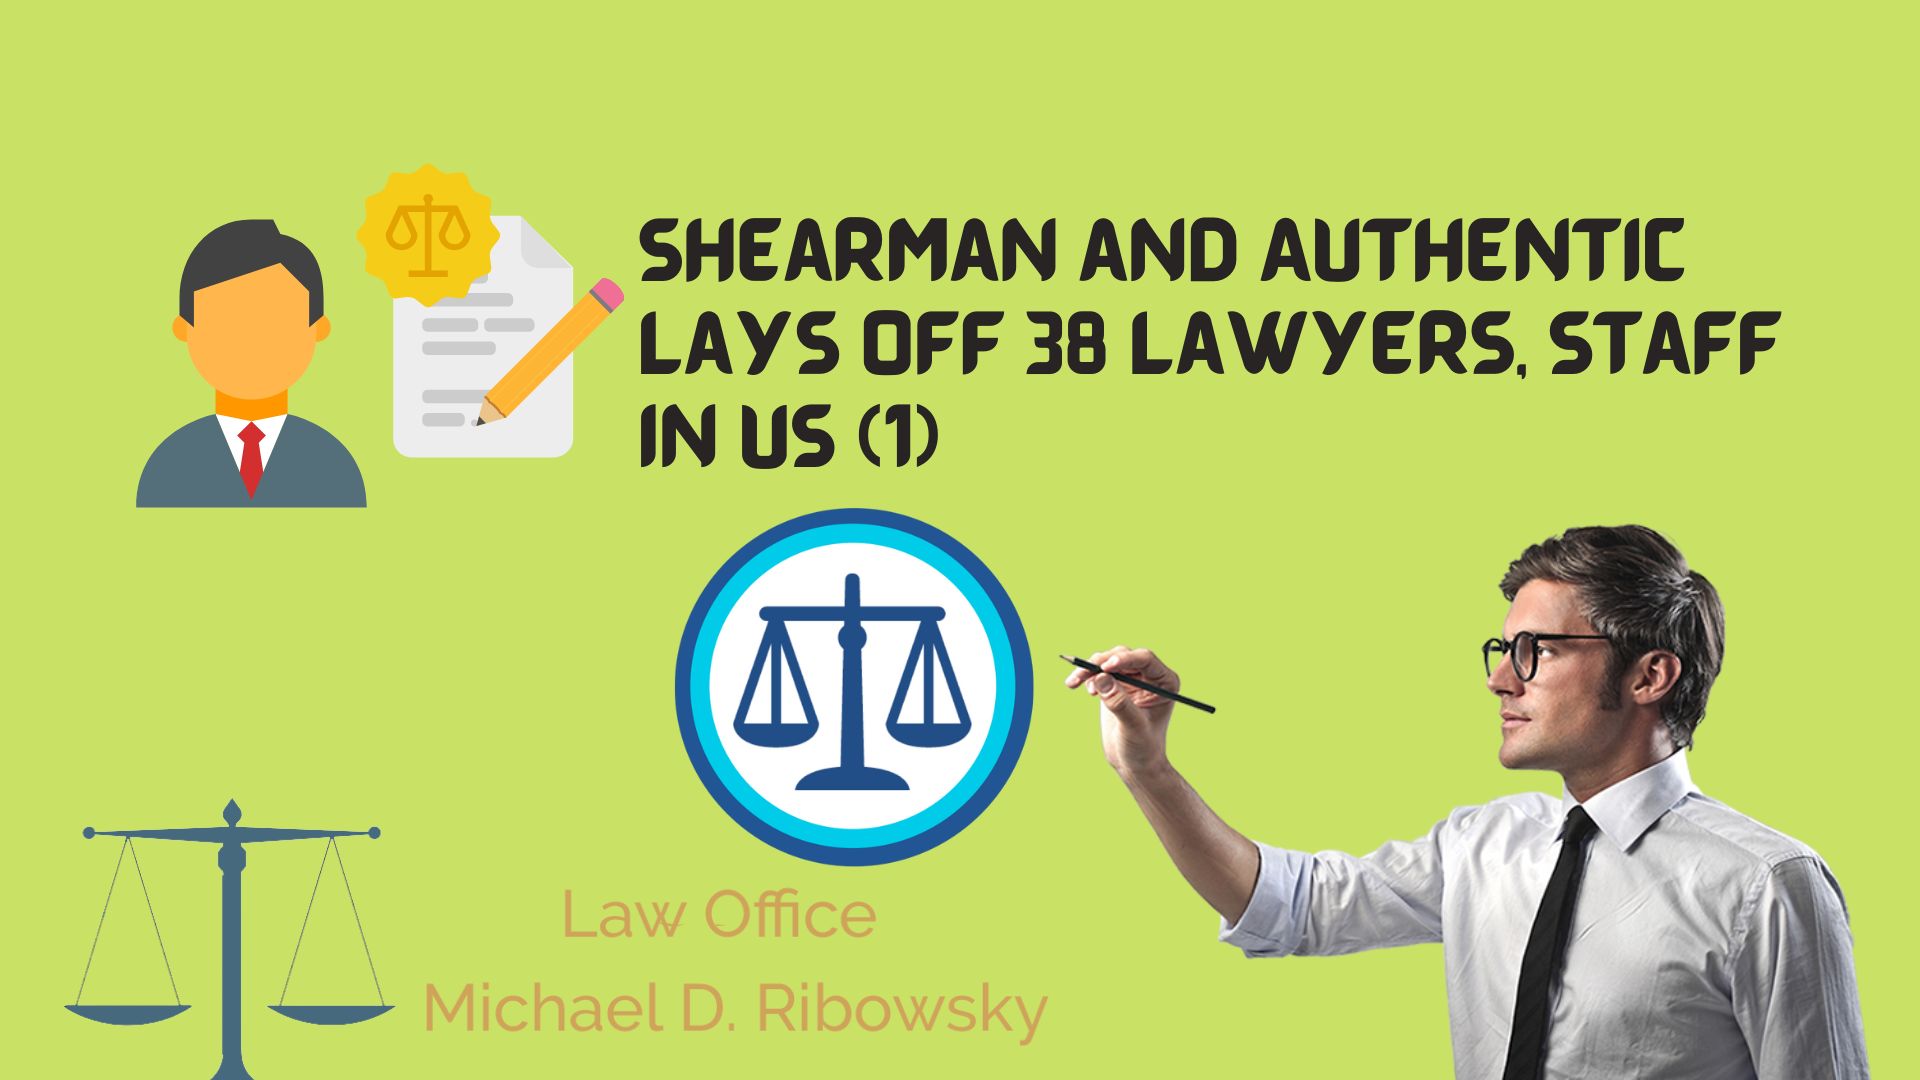 Shearman and authentic lays off 38 lawyers, staff in us (1)